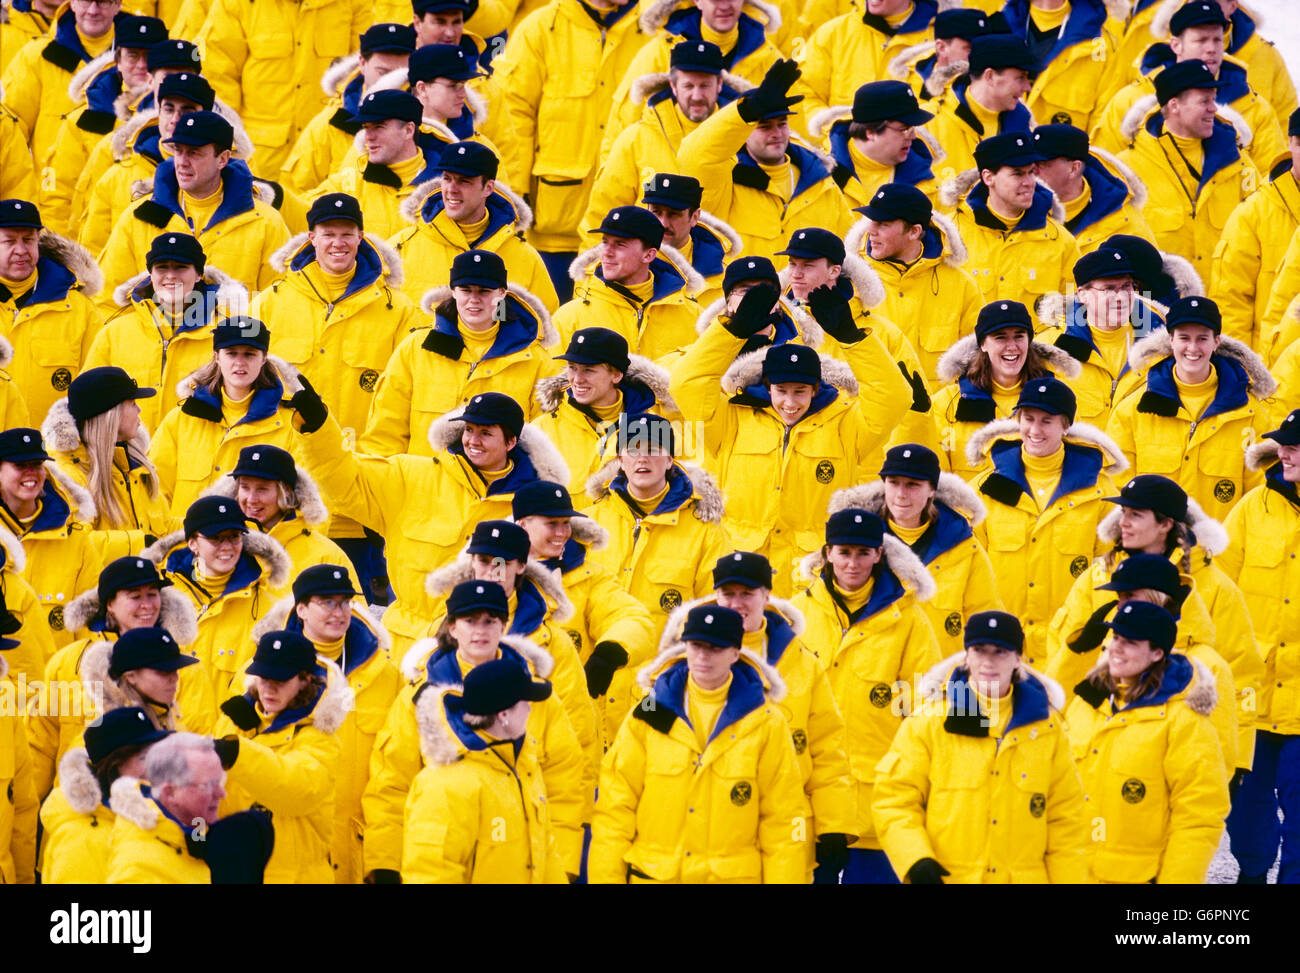 Team Sweden marching in the Opening ceremonies at the 1998 Olympic Winter Games, Nagano, Japan Stock Photo